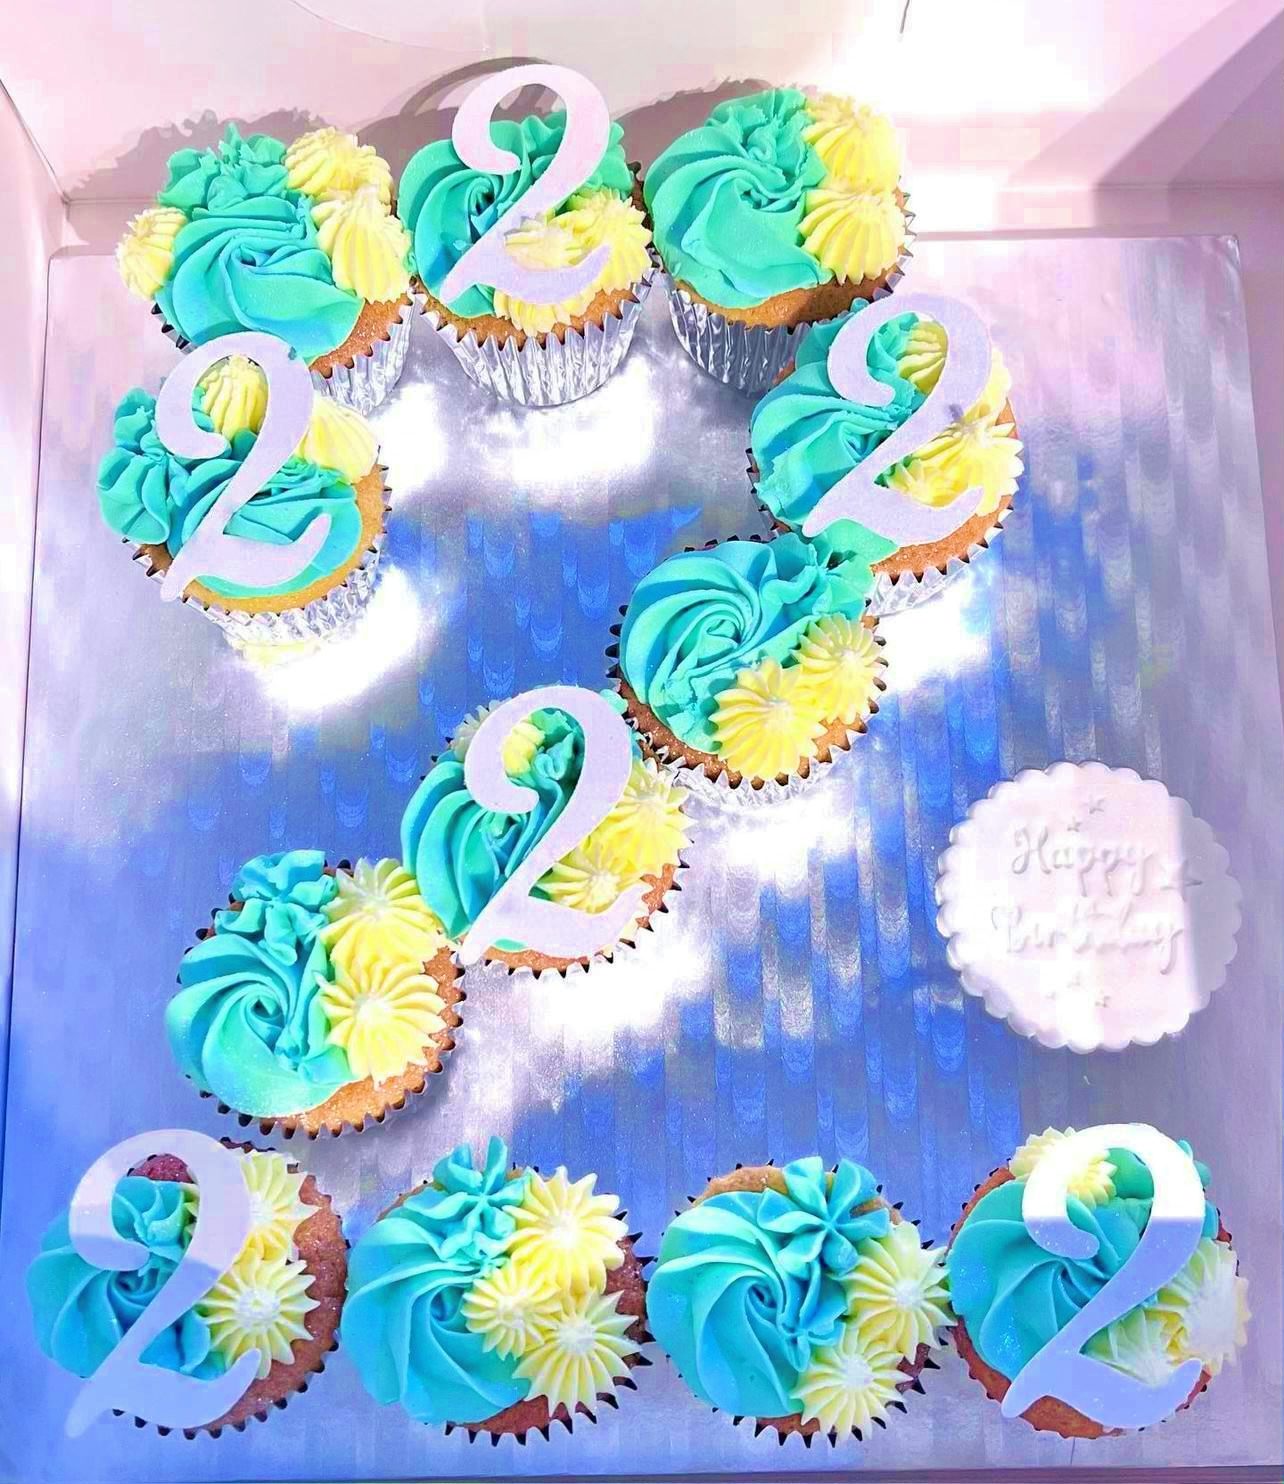 Blue and yellow cupcakes arranged in the shape of the number two